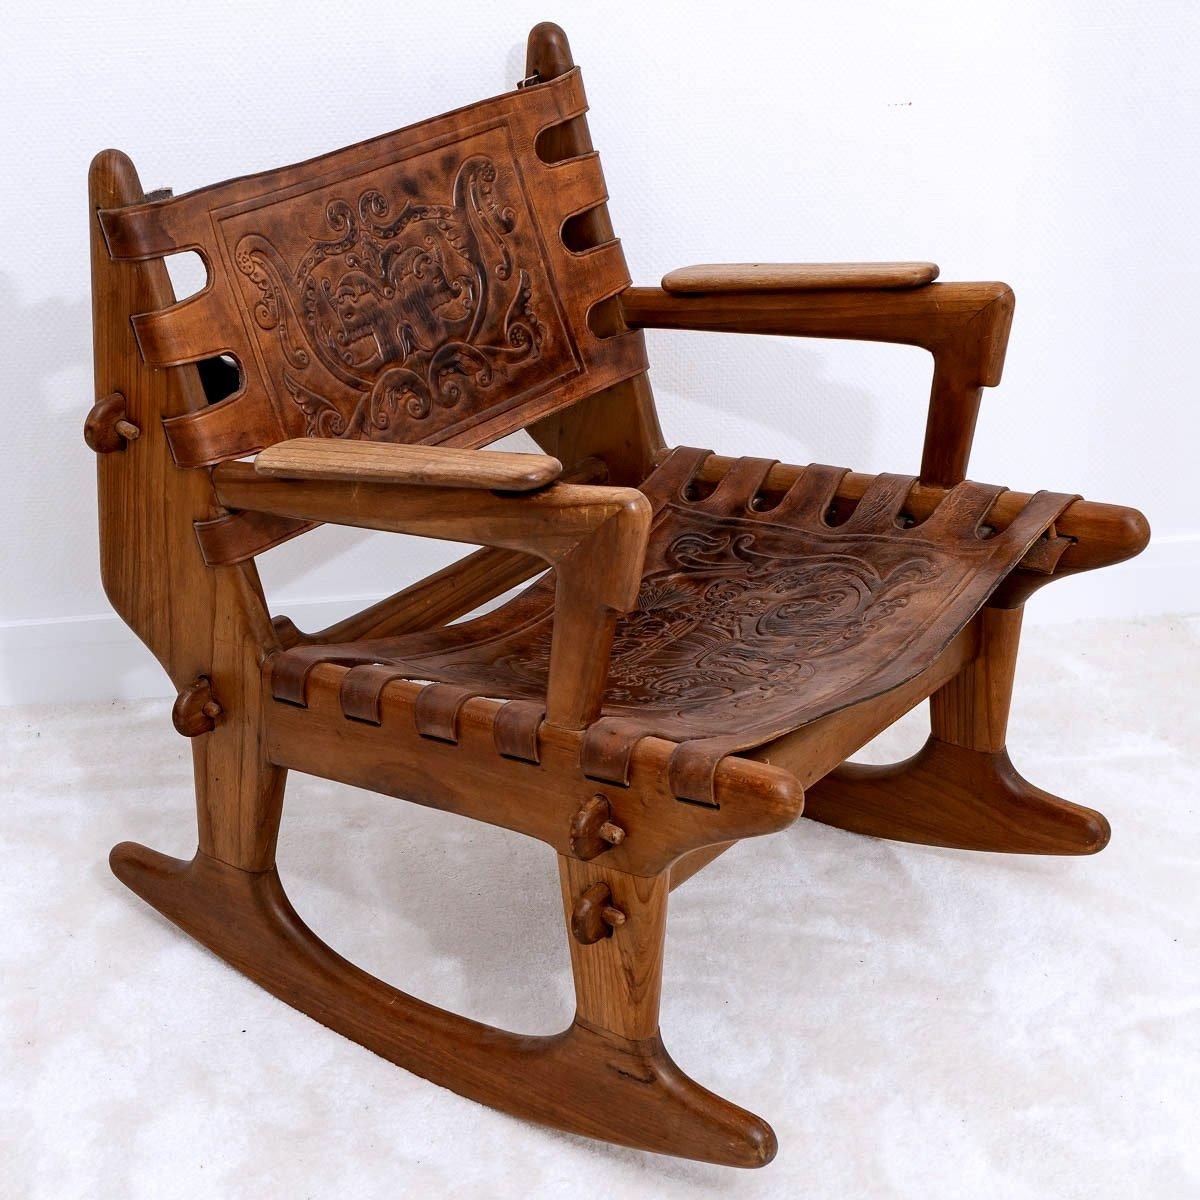  A beautiful Rocking Chair, Laurel's solid wood frames, which fit together and are held together by simple pegs, add a constructivist touch. 
The handcrafted leather slings, forming the seat and backrest, refer to the particular culture of Ecuador's